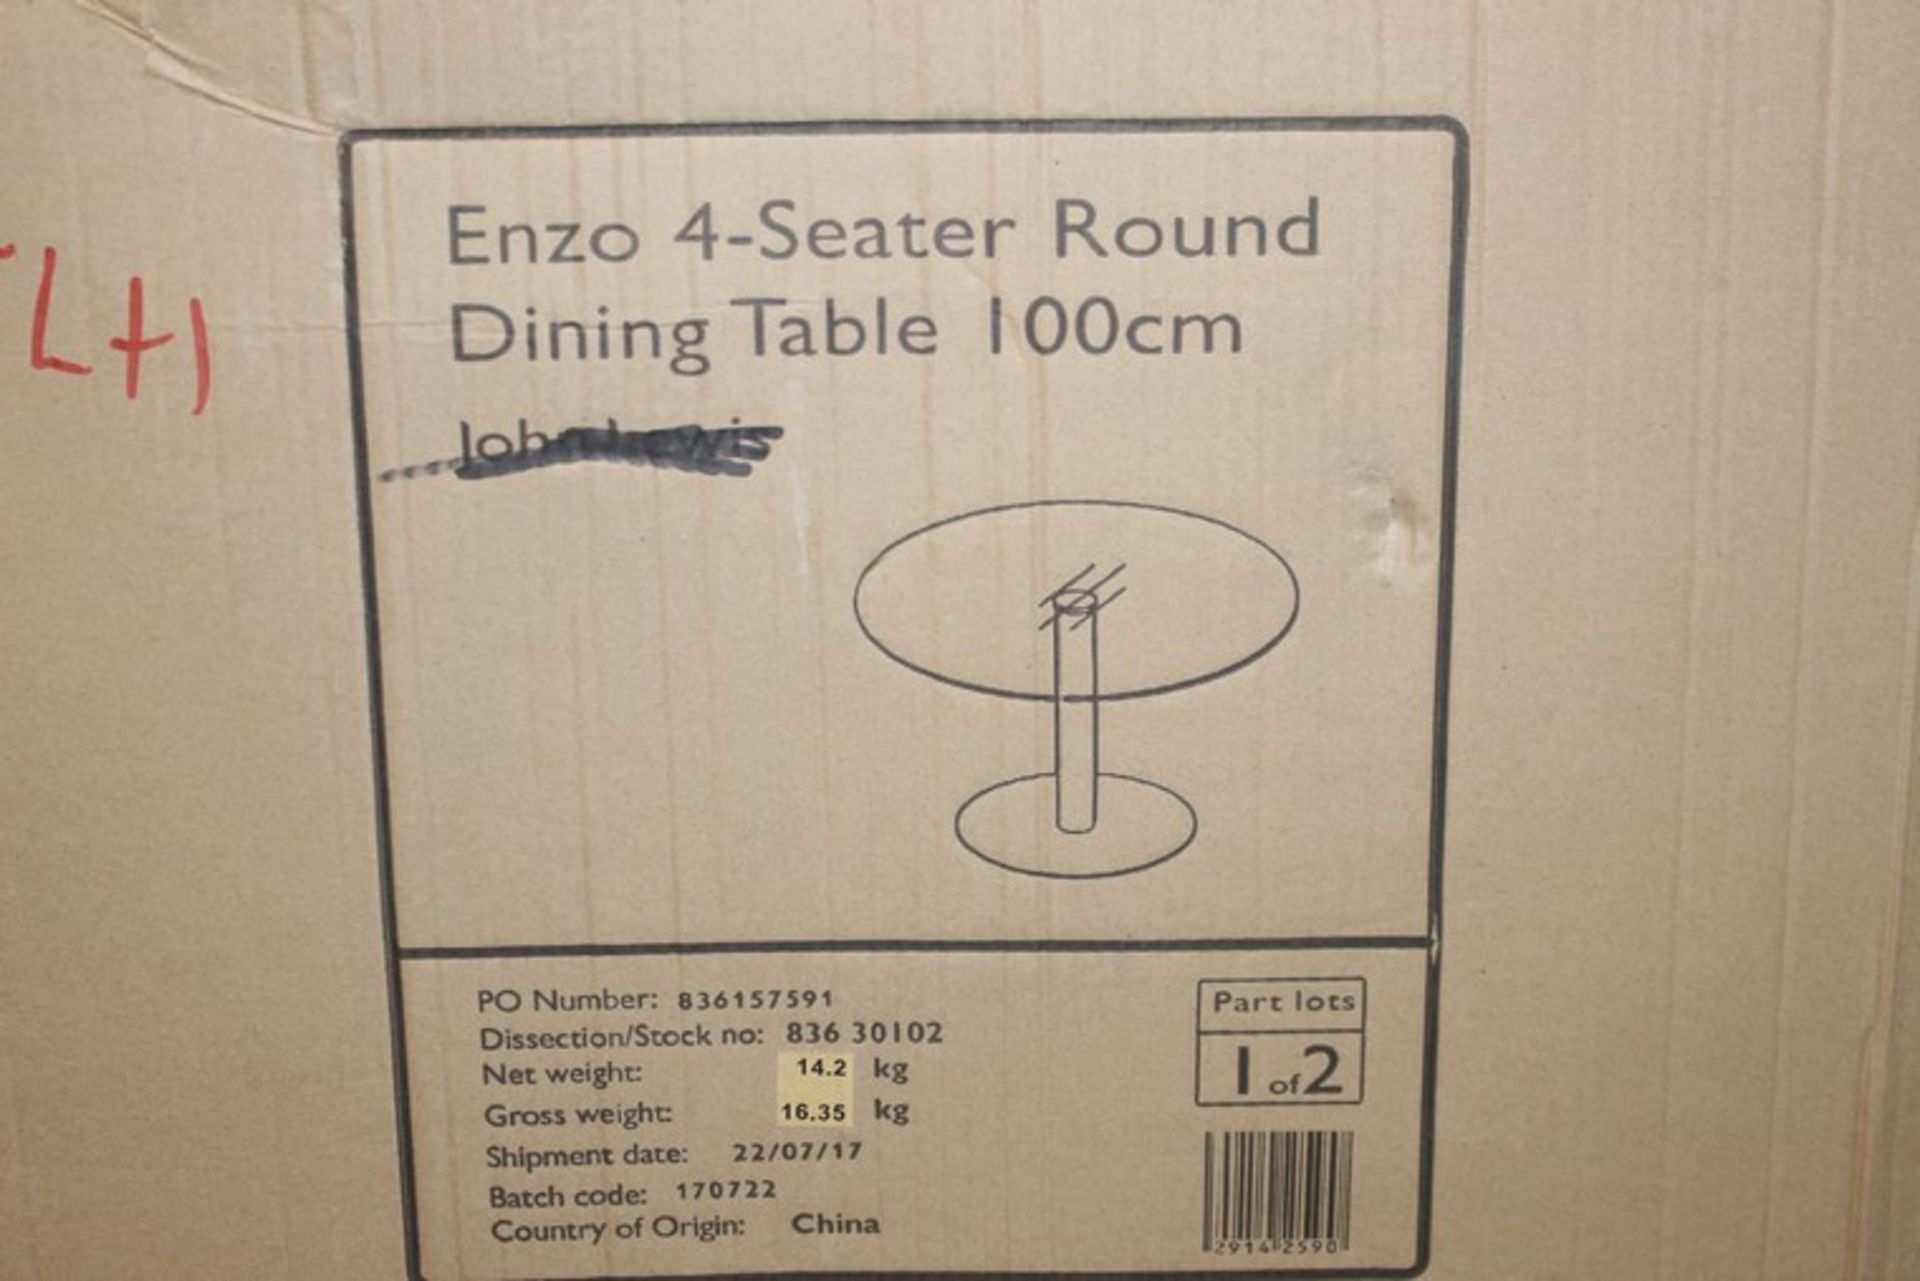 2 x 100CM ENZO 4 SEATER ROUND DINING TABLES (PART 1 OF 2 ONLY) (08.01.18) (83630102) *PLEASE NOTE